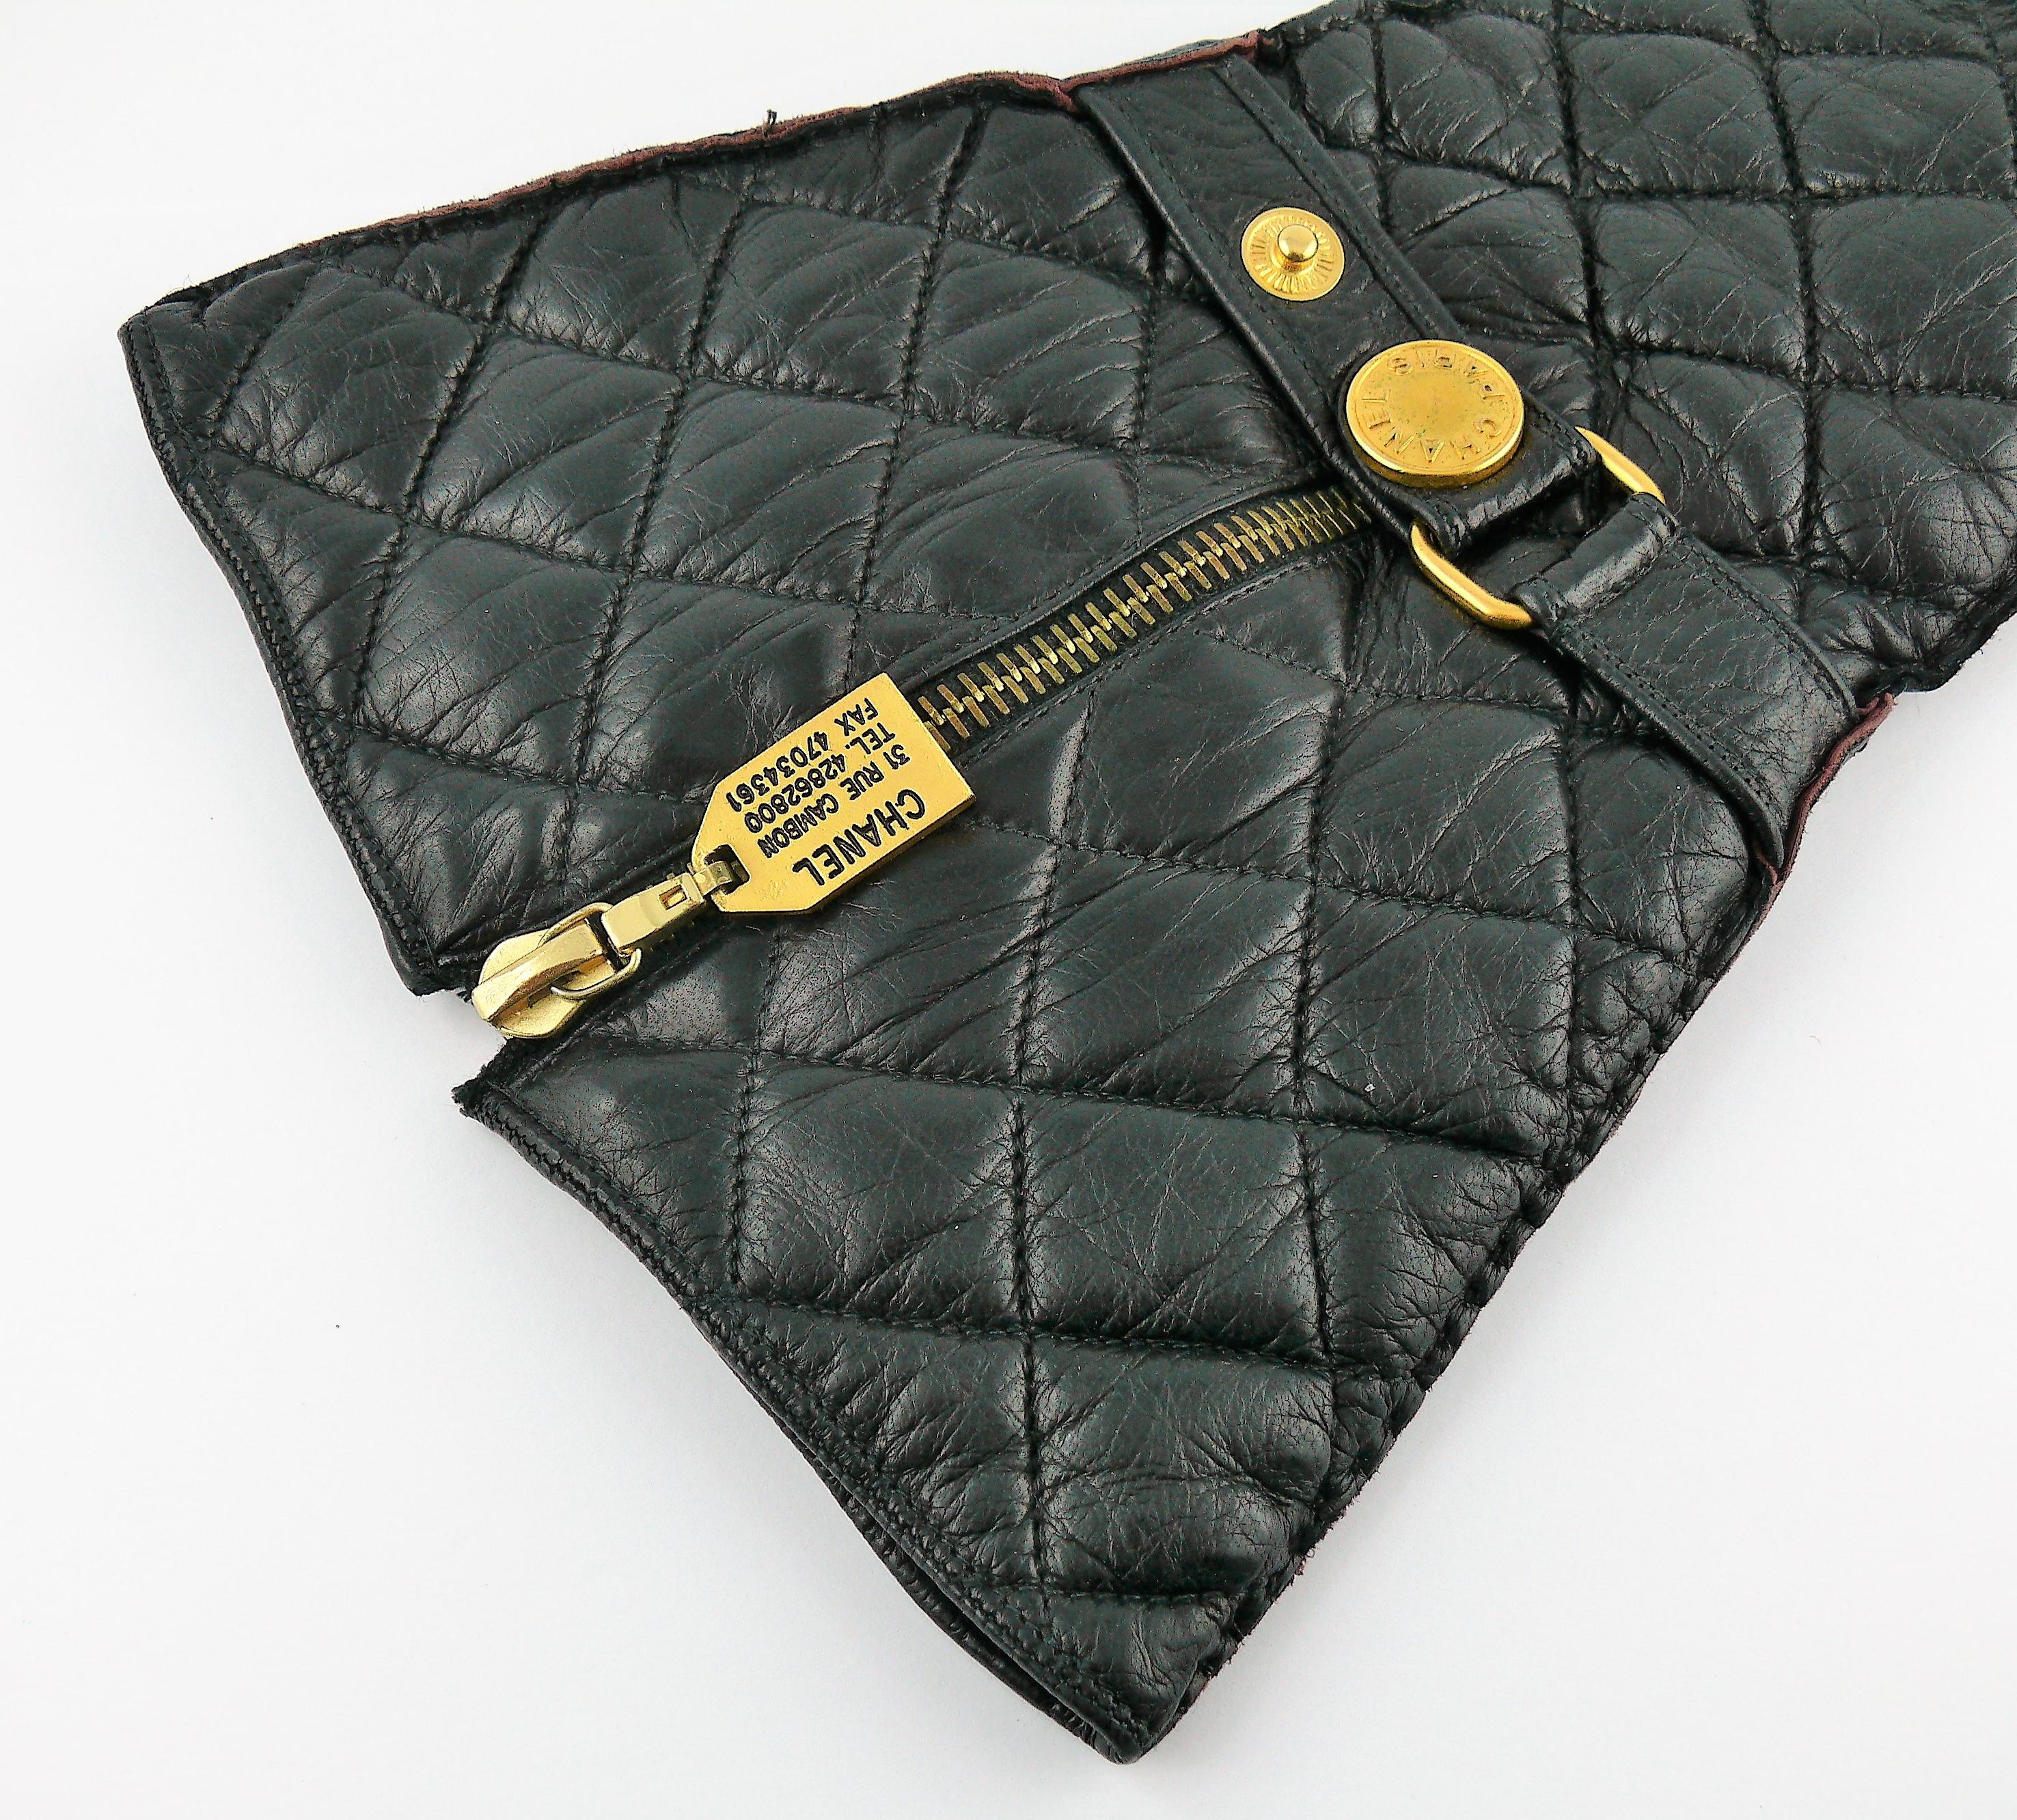 Chanel Vintage Iconic Black Quilted Kidskin Leather Rue Cambon Gloves Size 7 1/2 For Sale 5